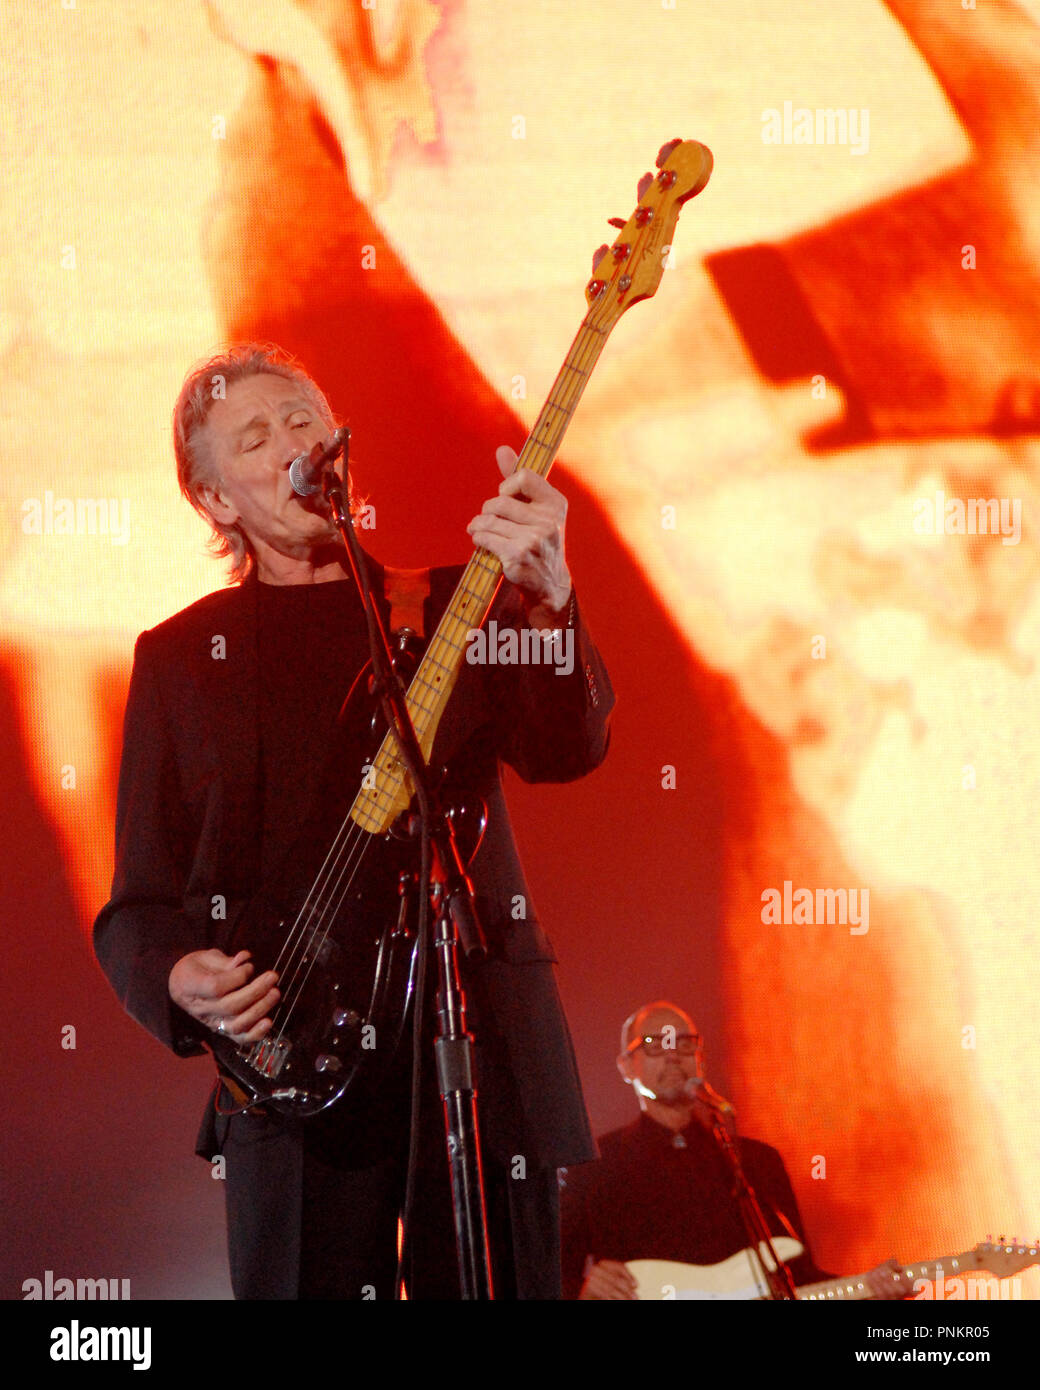 Pink Floyd co-founder Roger Waters performs during The Dark Side Of The Moon Tour at Philips Arena in Atlanta, Georgia on May 22, 2007 Credit: Chris McKay/MediaPunch Stock Photo